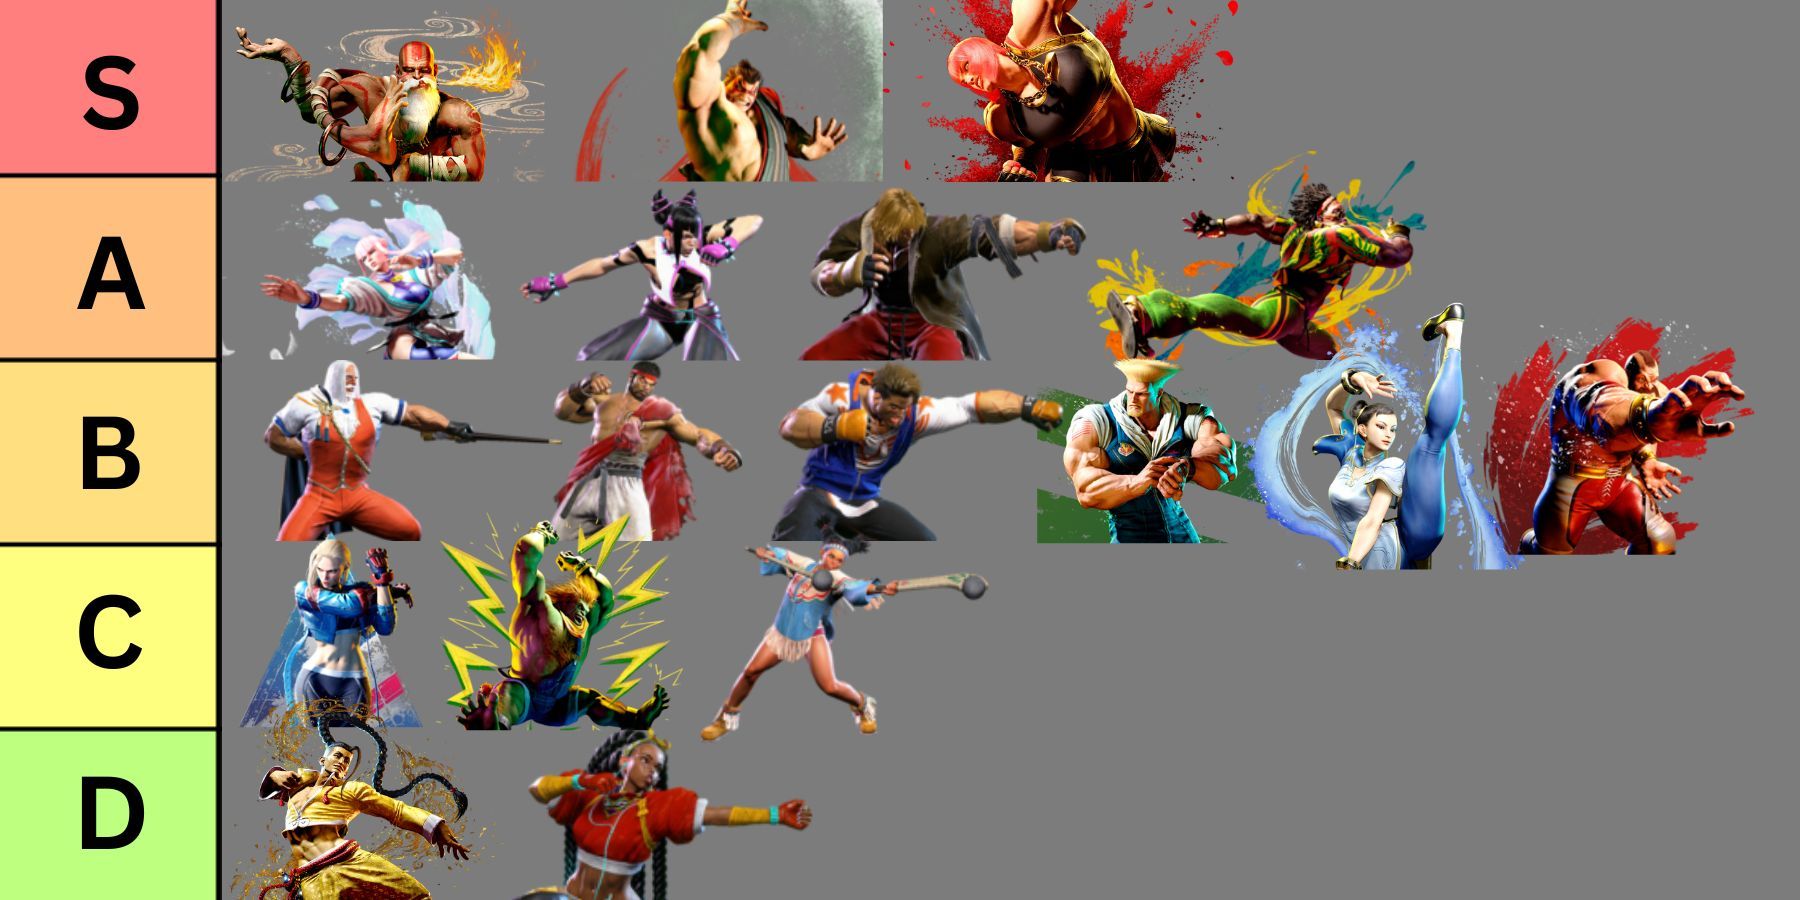 bafael on X: Made a tier list of how much clothing SF6 characters